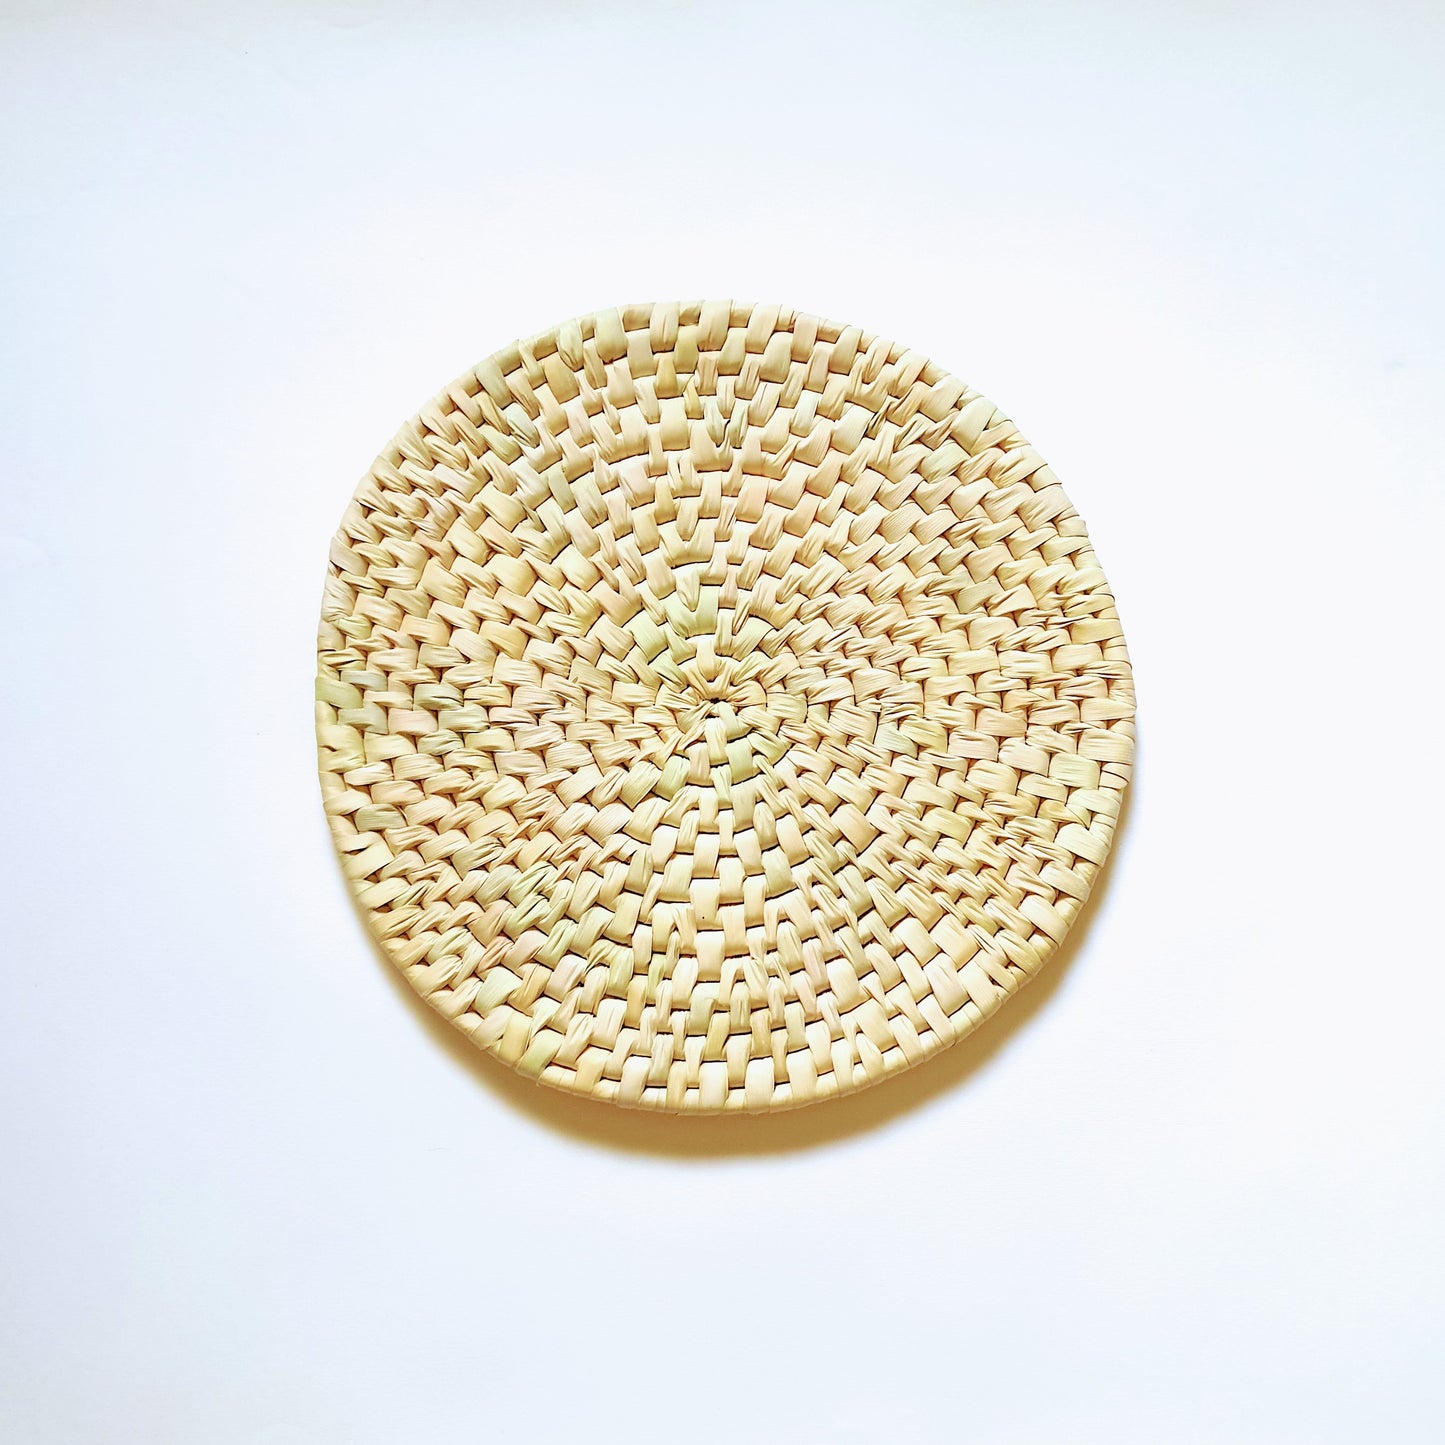 Staggered round heat resistant placemats